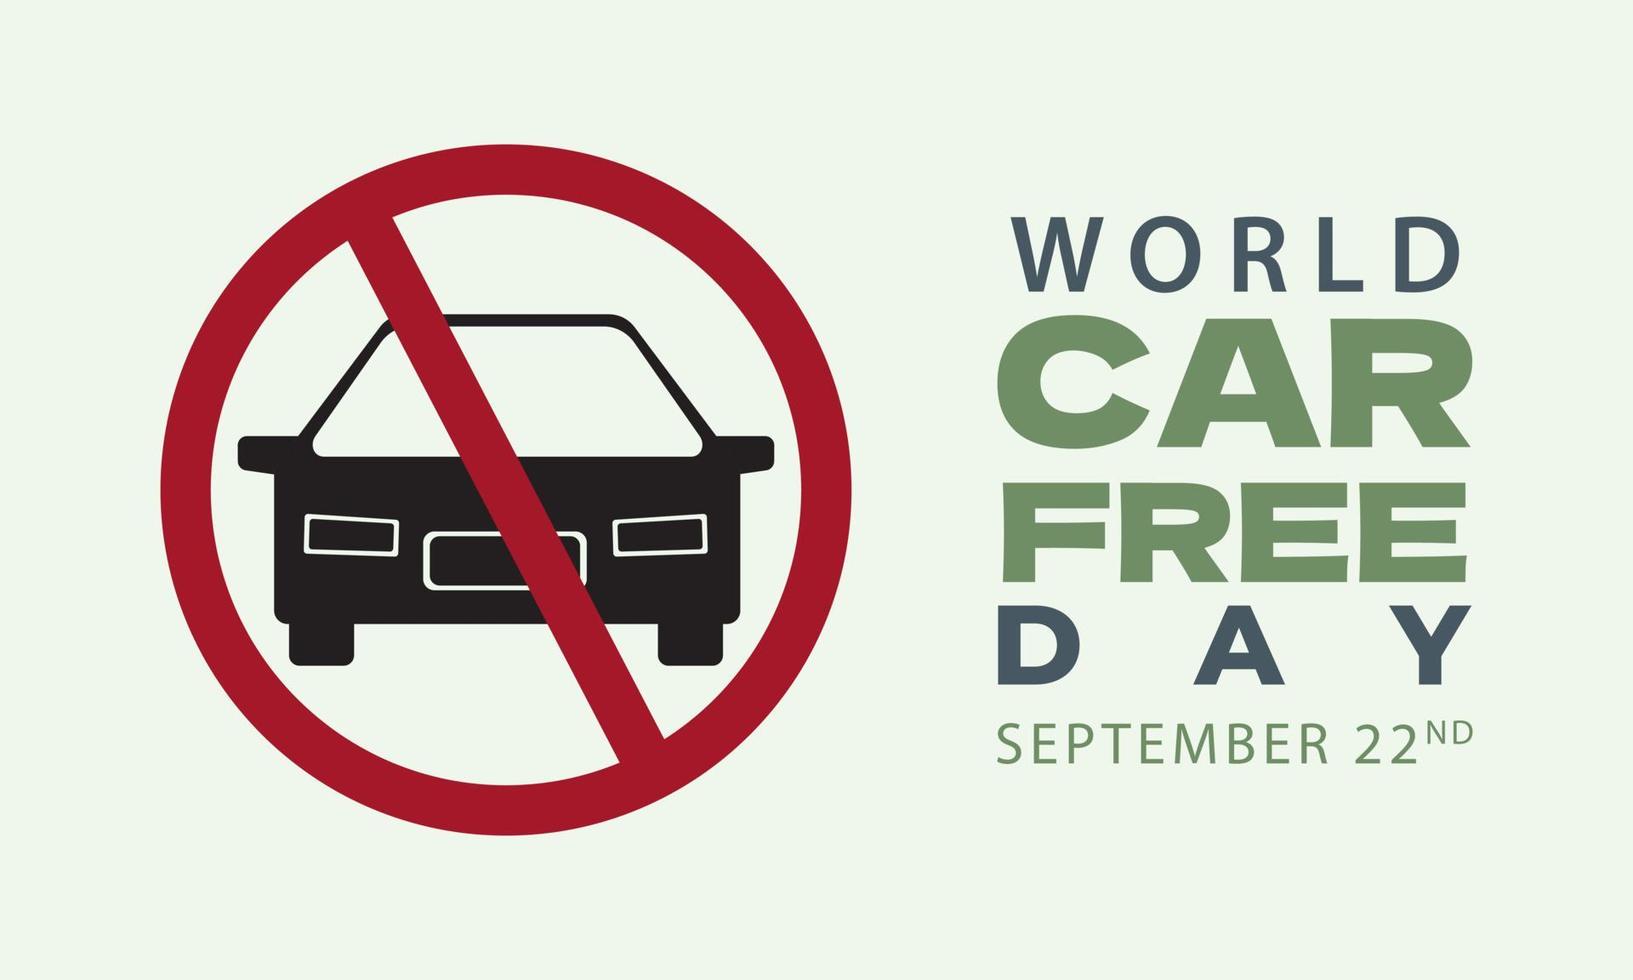 Car free day September 22nd with ban cars illustration on isolated background vector